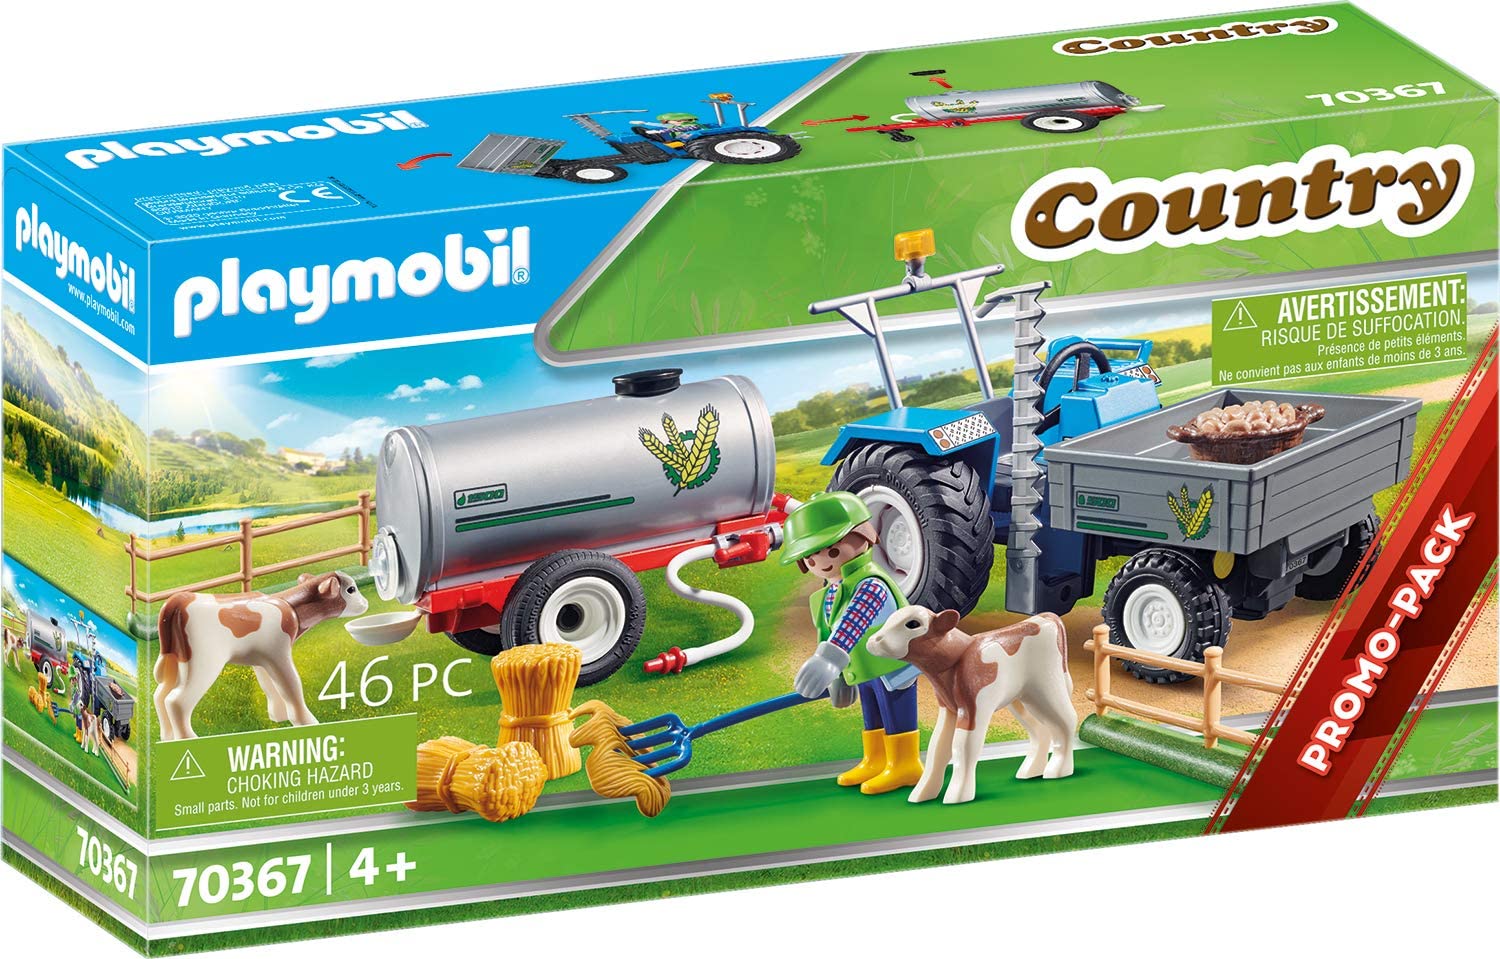 Playmobil Farmer with Cow Playsets 